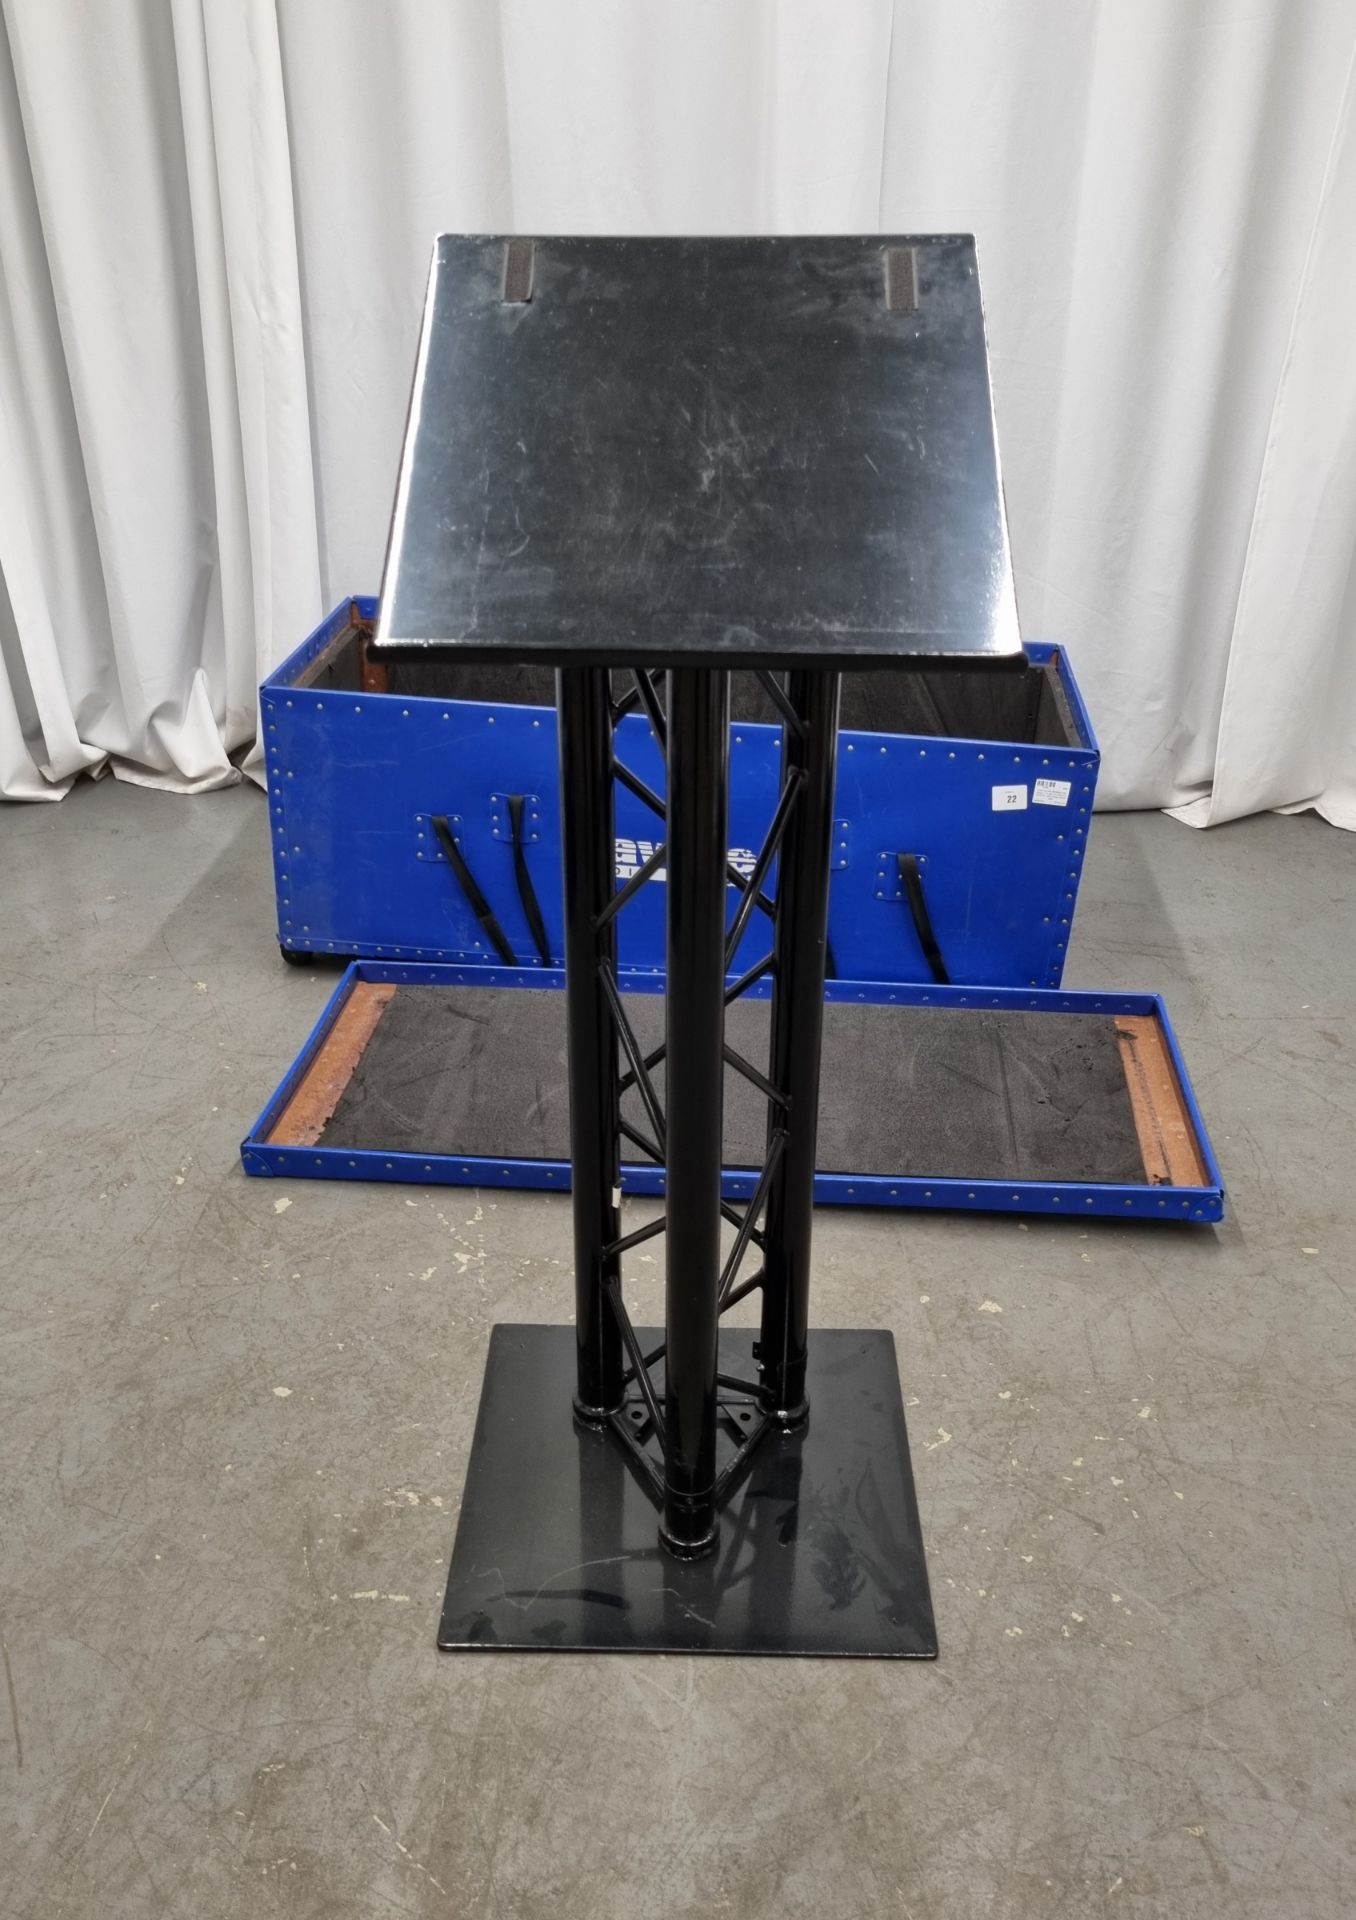 Litestructures Astralite truss lectern - W 480 x D 450 x H 1220mm - with transportation case